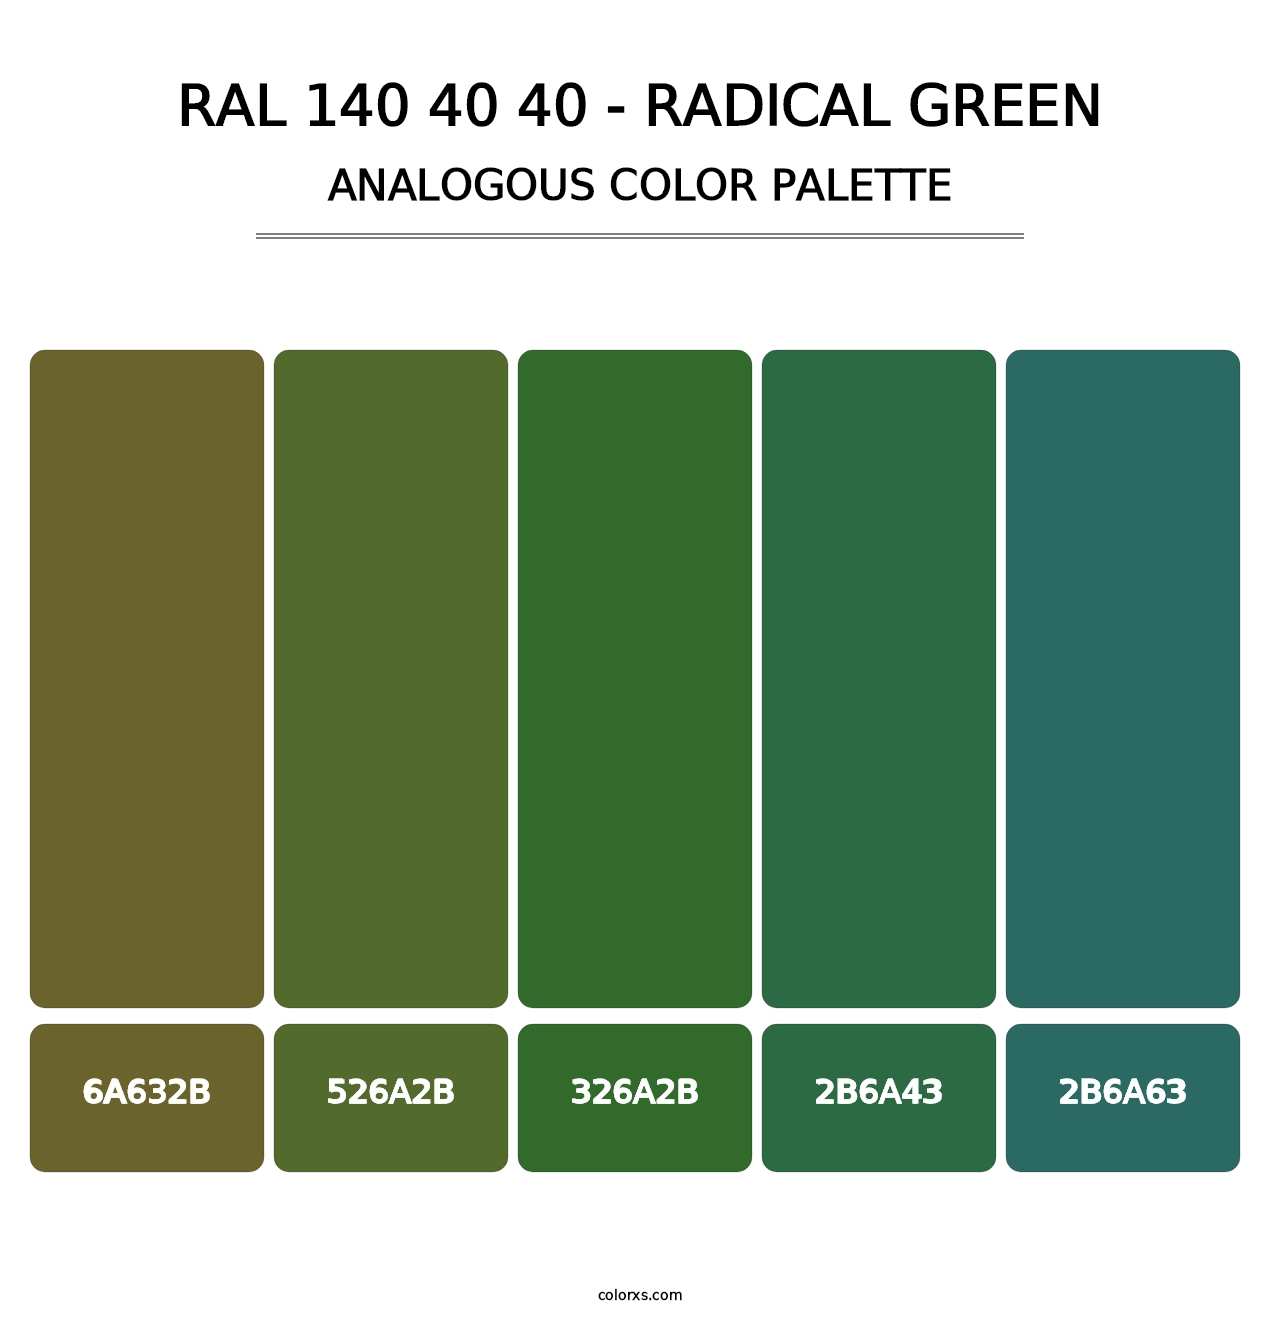 RAL 140 40 40 - Radical Green - Analogous Color Palette